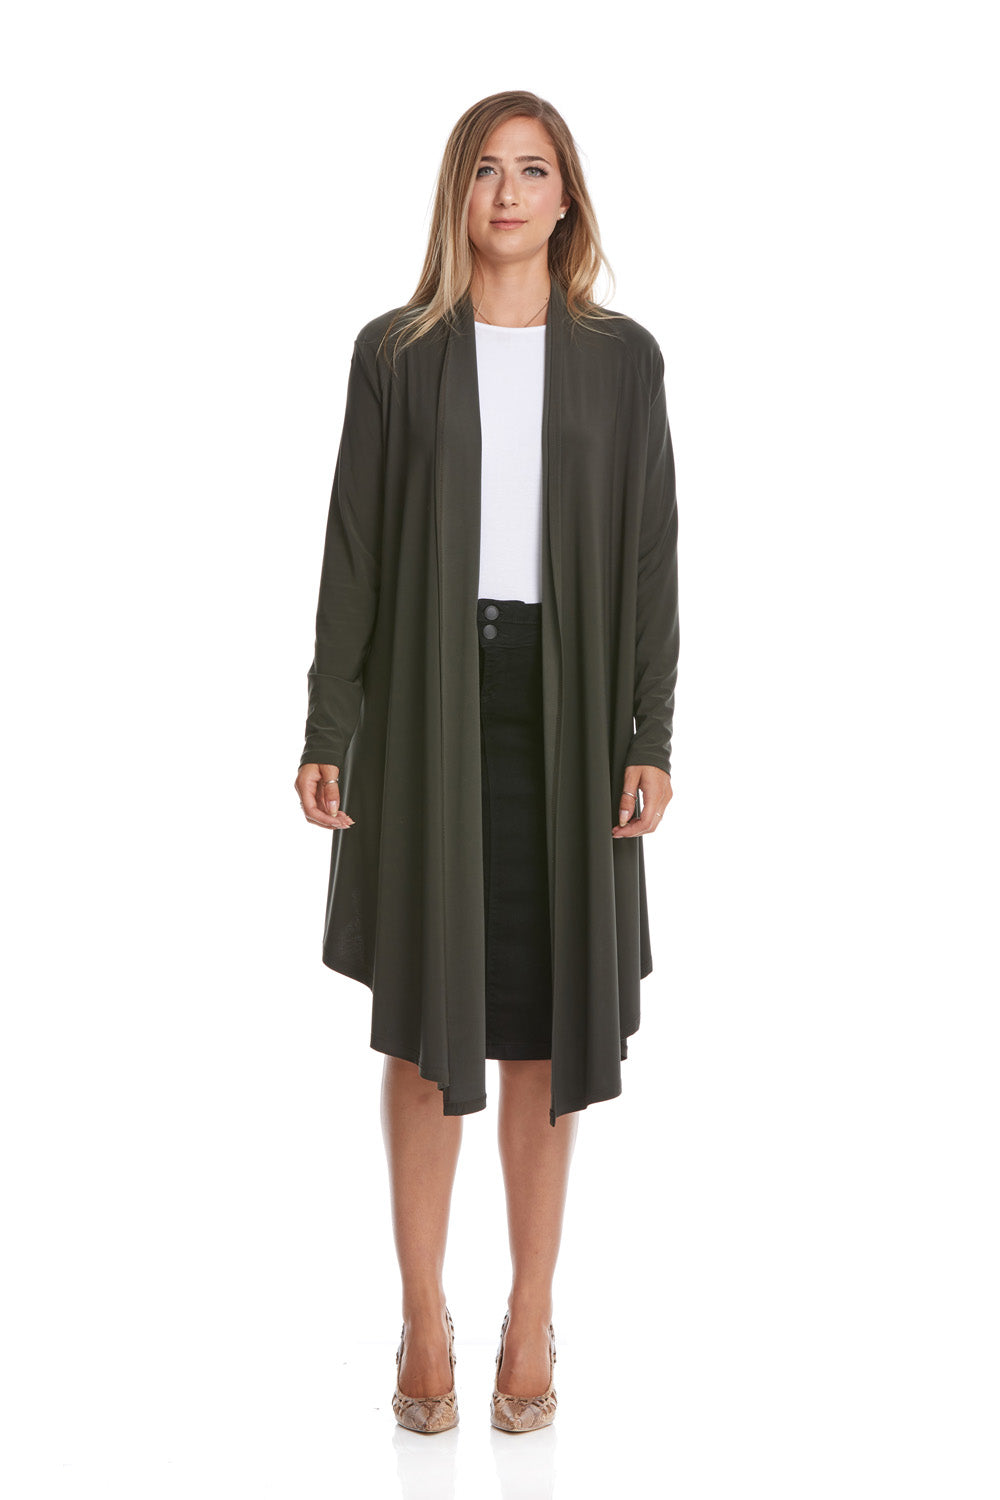 Esteez CHLOEE - Womens Long Sleeve Waterfall Open Front Cardigan - OLIVE